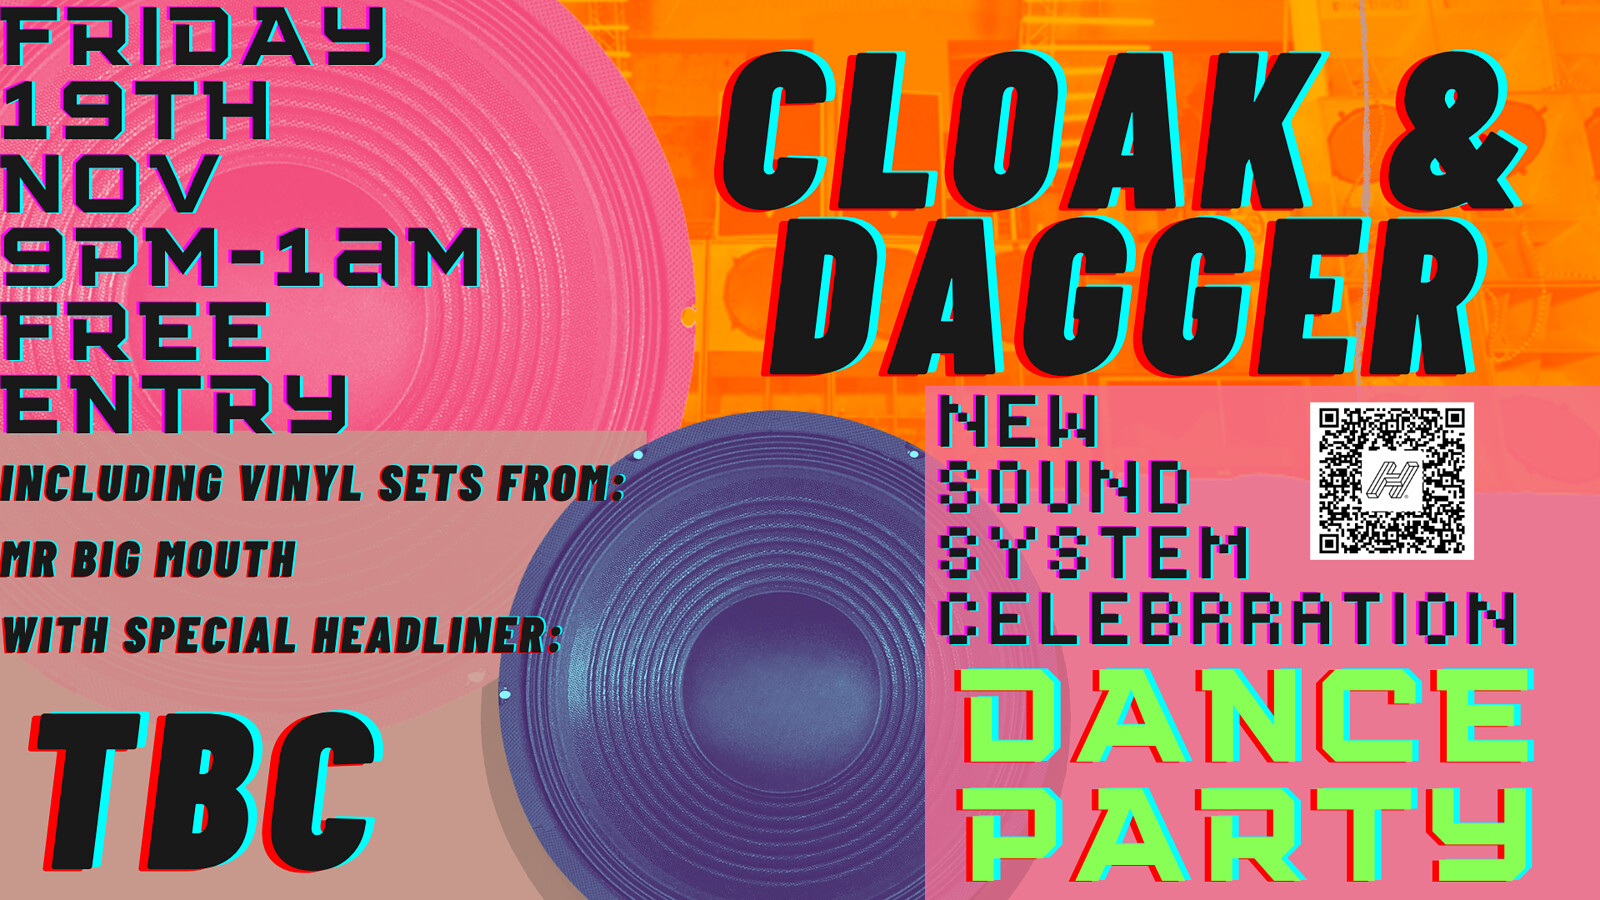 CLOAK AND DAGGER NEW SOUNDSYSTEM DANCE PARTY at The Cloak and Dagger